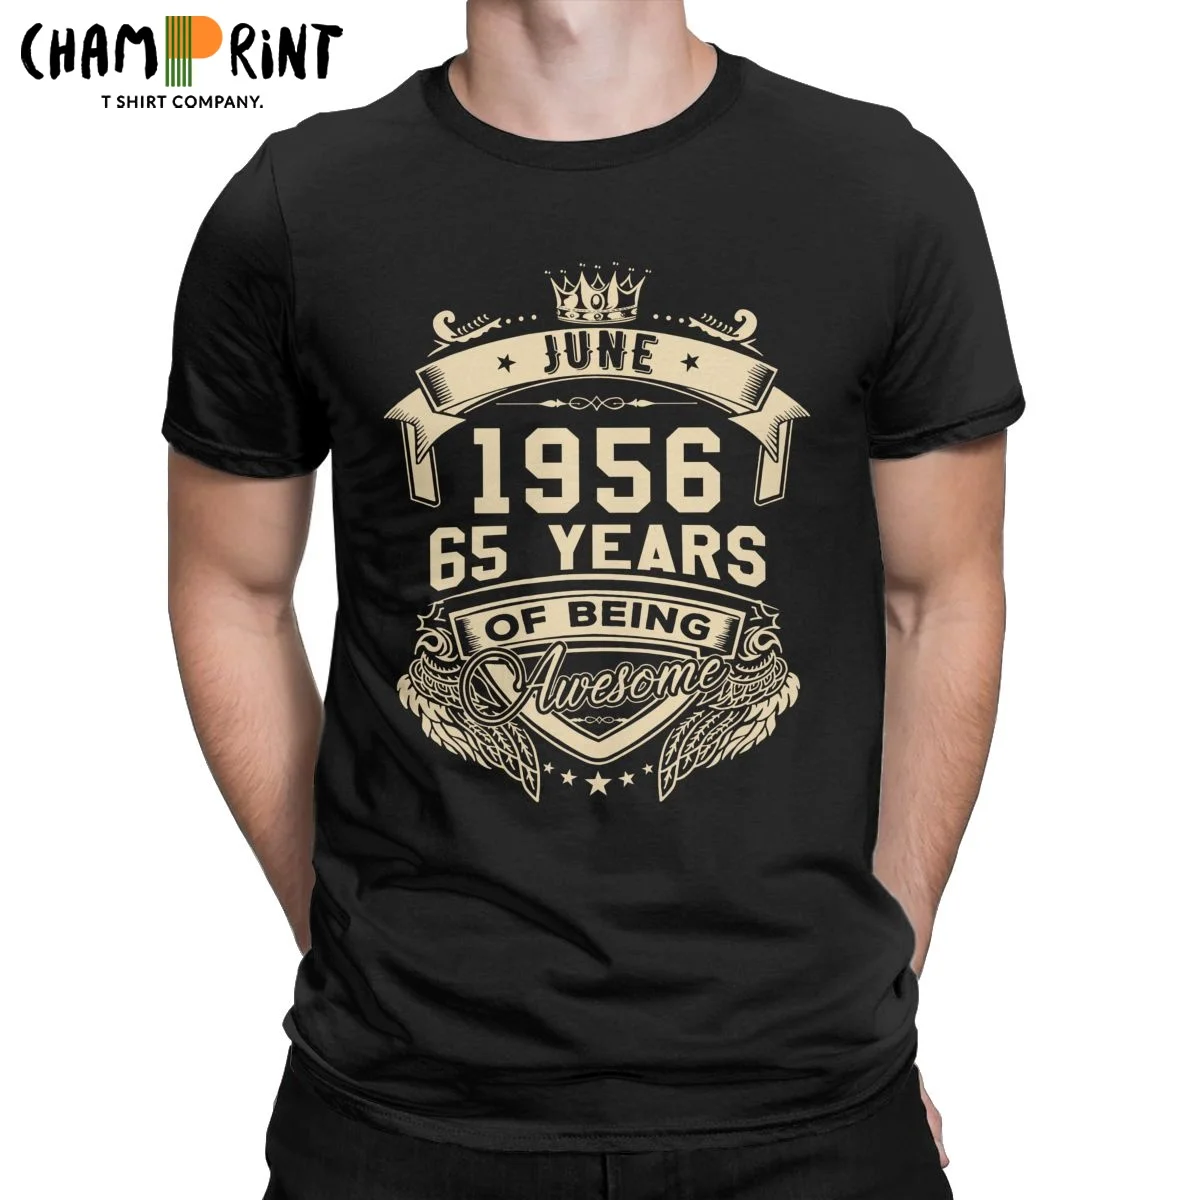 

Men's Born In June 1956 65 Years Of Being Awesome Limited T Shirts 100% Cotton Clothes Short Sleeve Tee Shirt Plus Size T-Shirts